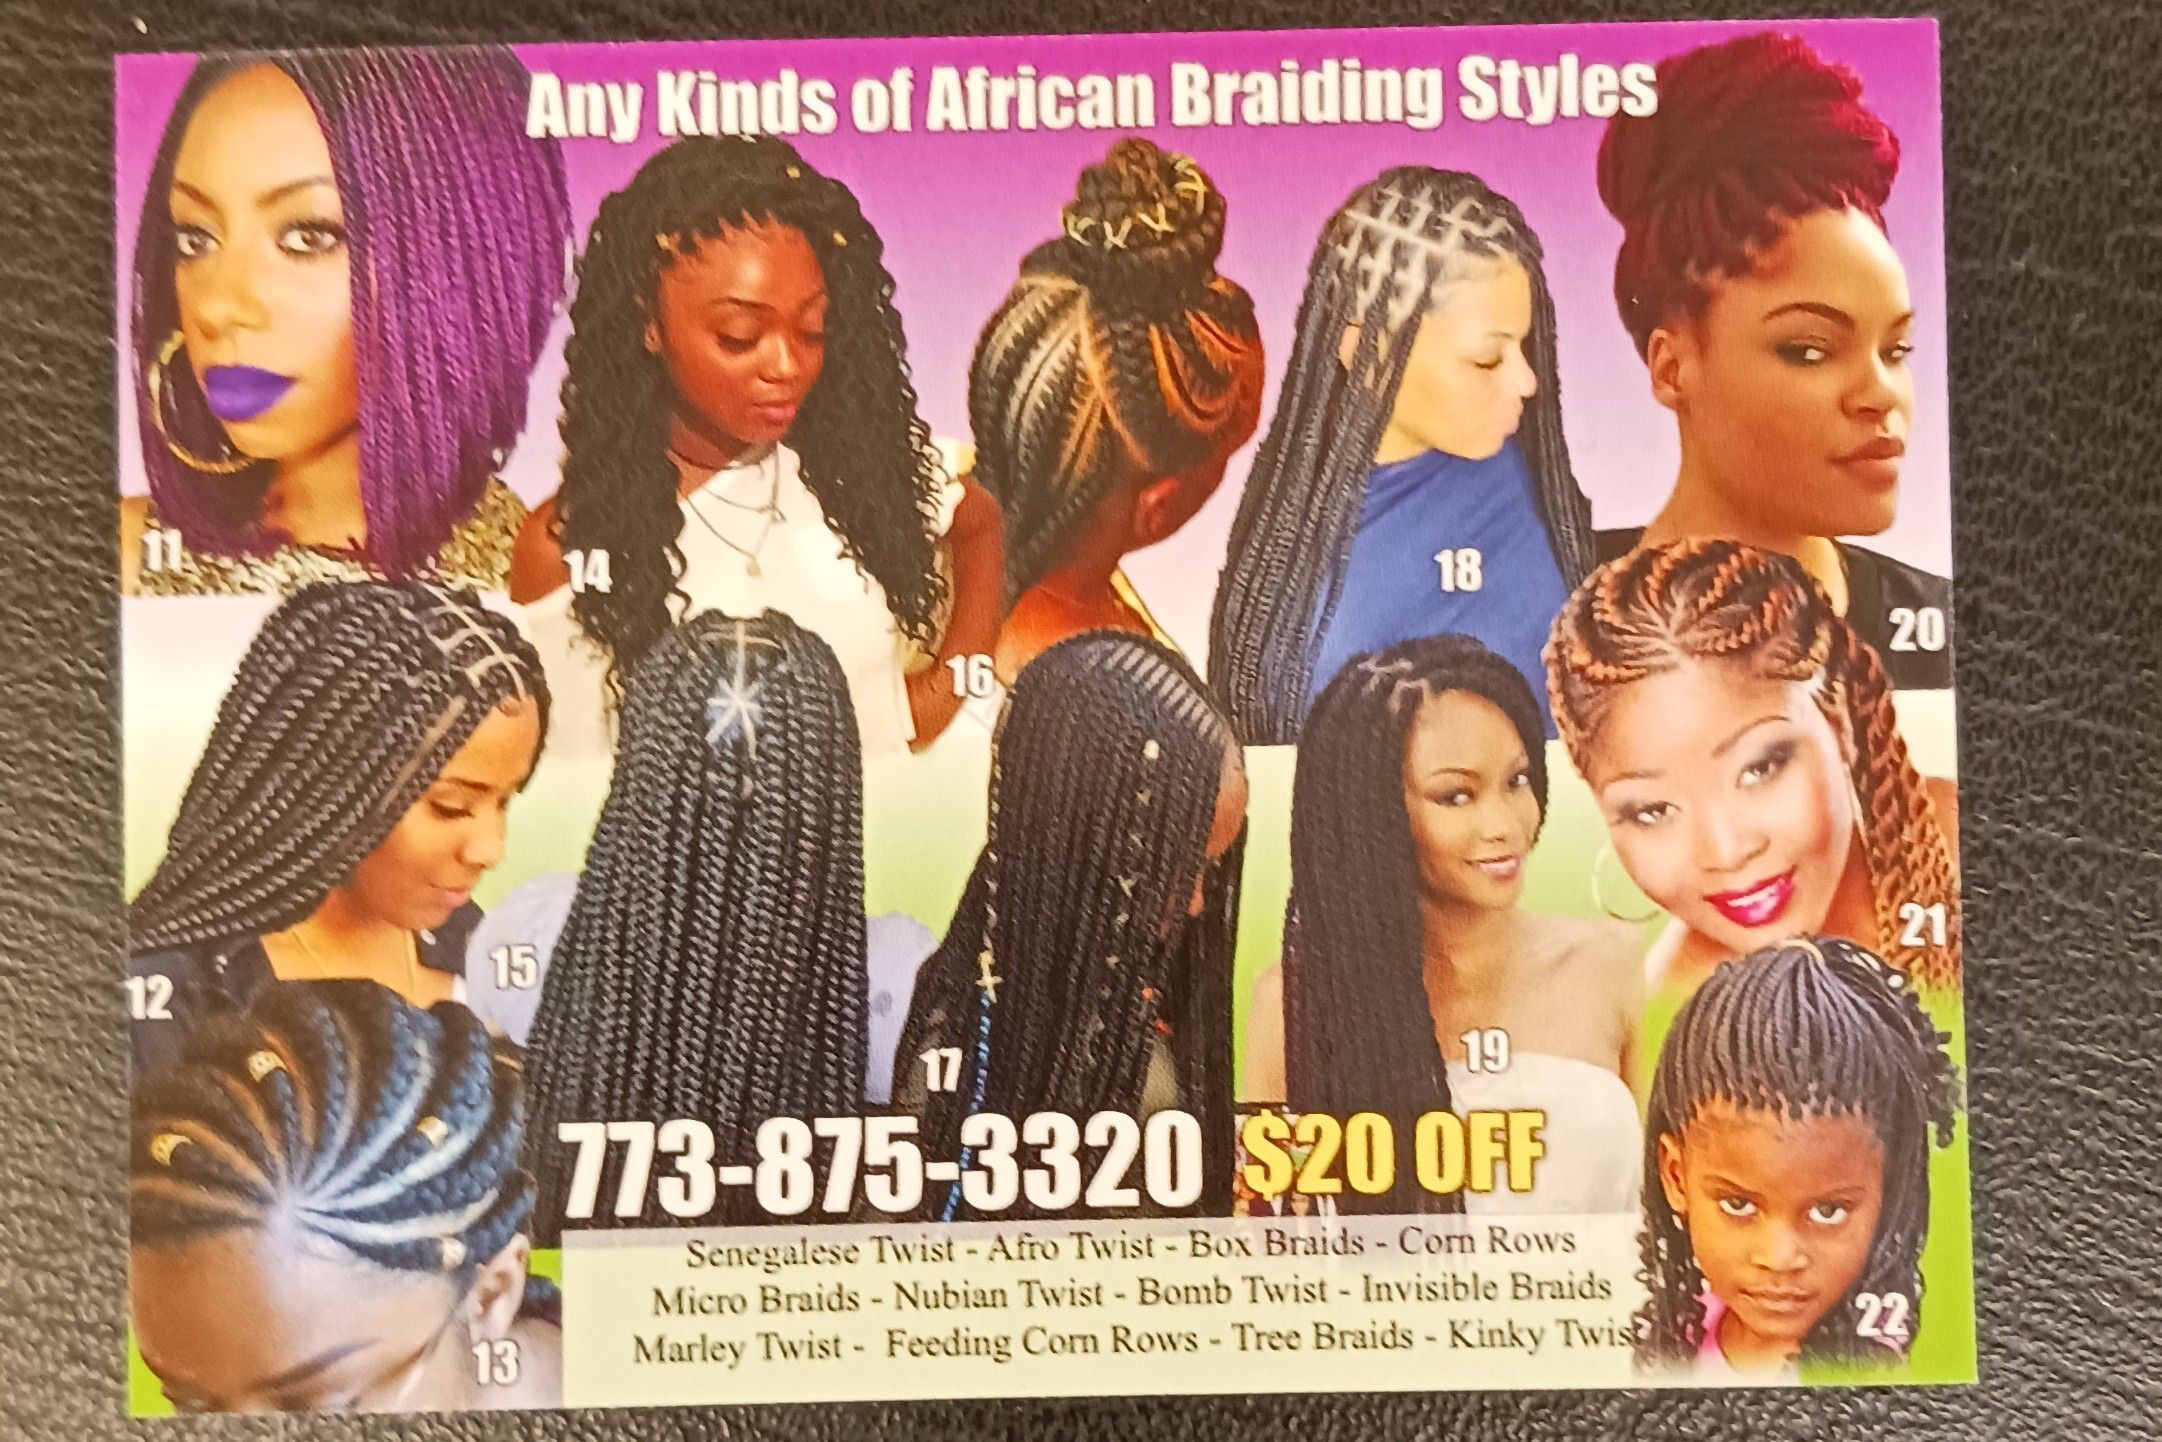 40 Ideas of Micro Braids, Invisible Braids and Micro Twists  Tree braids  hairstyles, Micro braids hairstyles, Micro braids styles